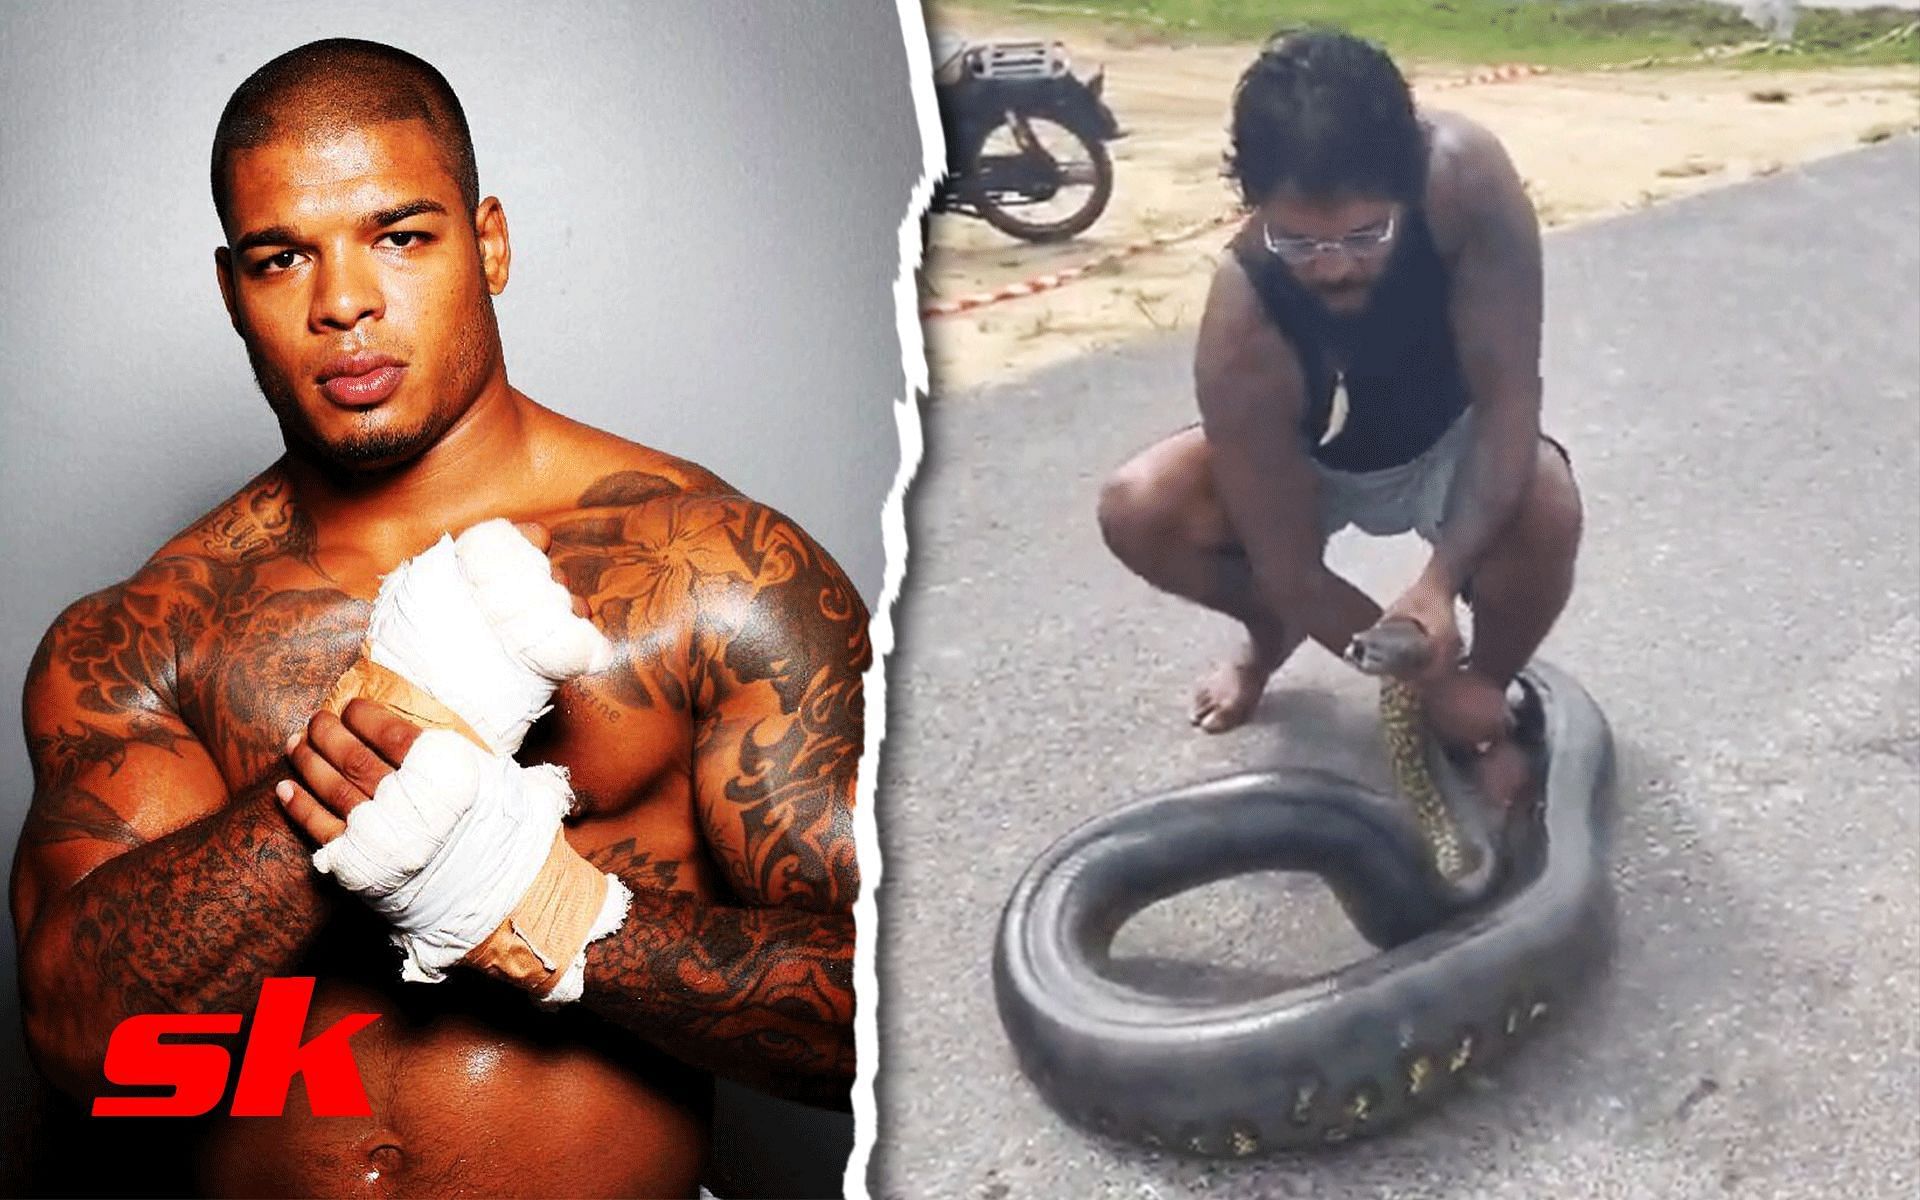 Tyrone Spong (left) [Images courtesy of @tyrone_spong on Instagram]